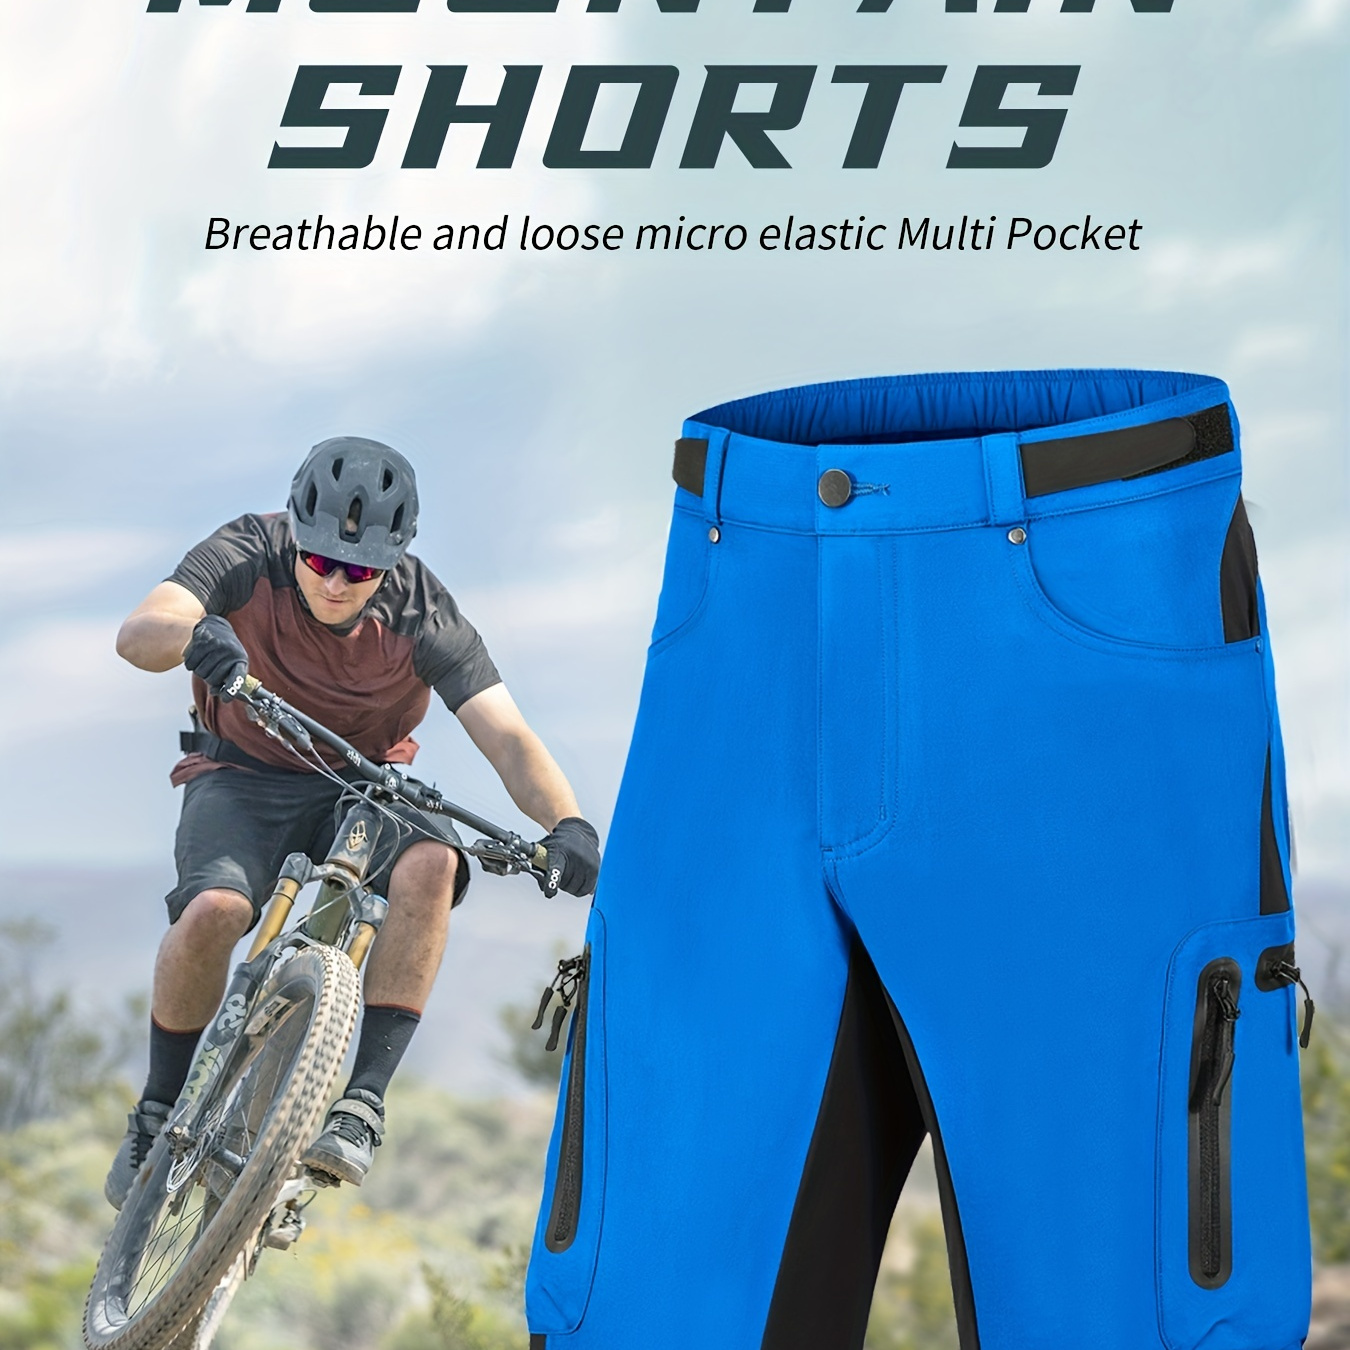 

Men's Hiking Cargo Shorts Lightweight Quick Dry Stretch Mtb Shorts For Golf Fishing Tactical Outdoor Casual Shorts